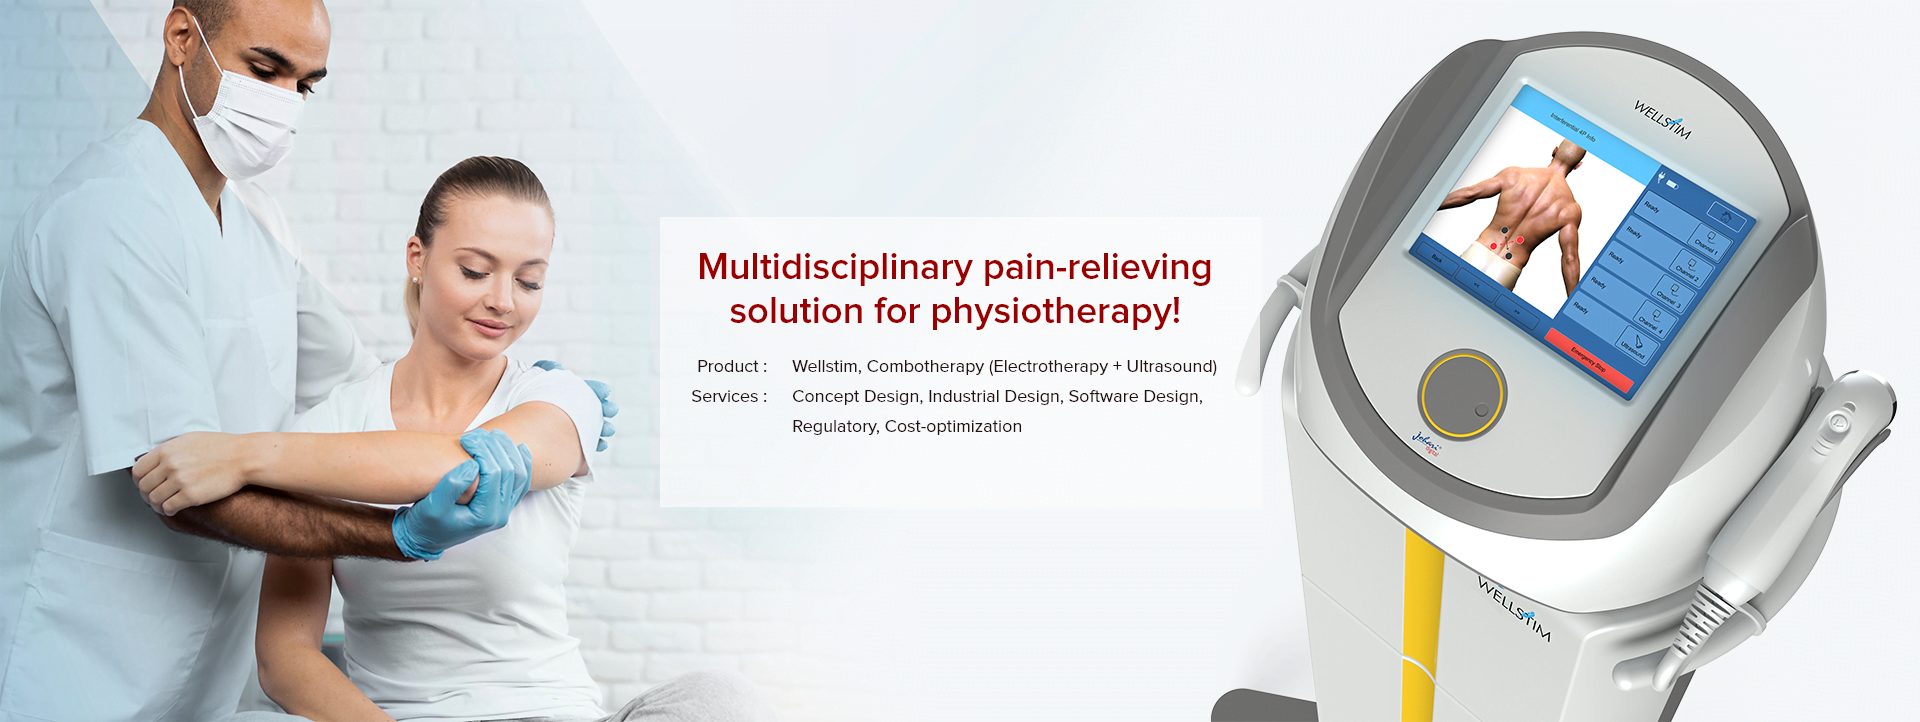 https://www.joharidigital.com/wp-content/uploads/2021/08/pain-relief-physiotherapy.jpg